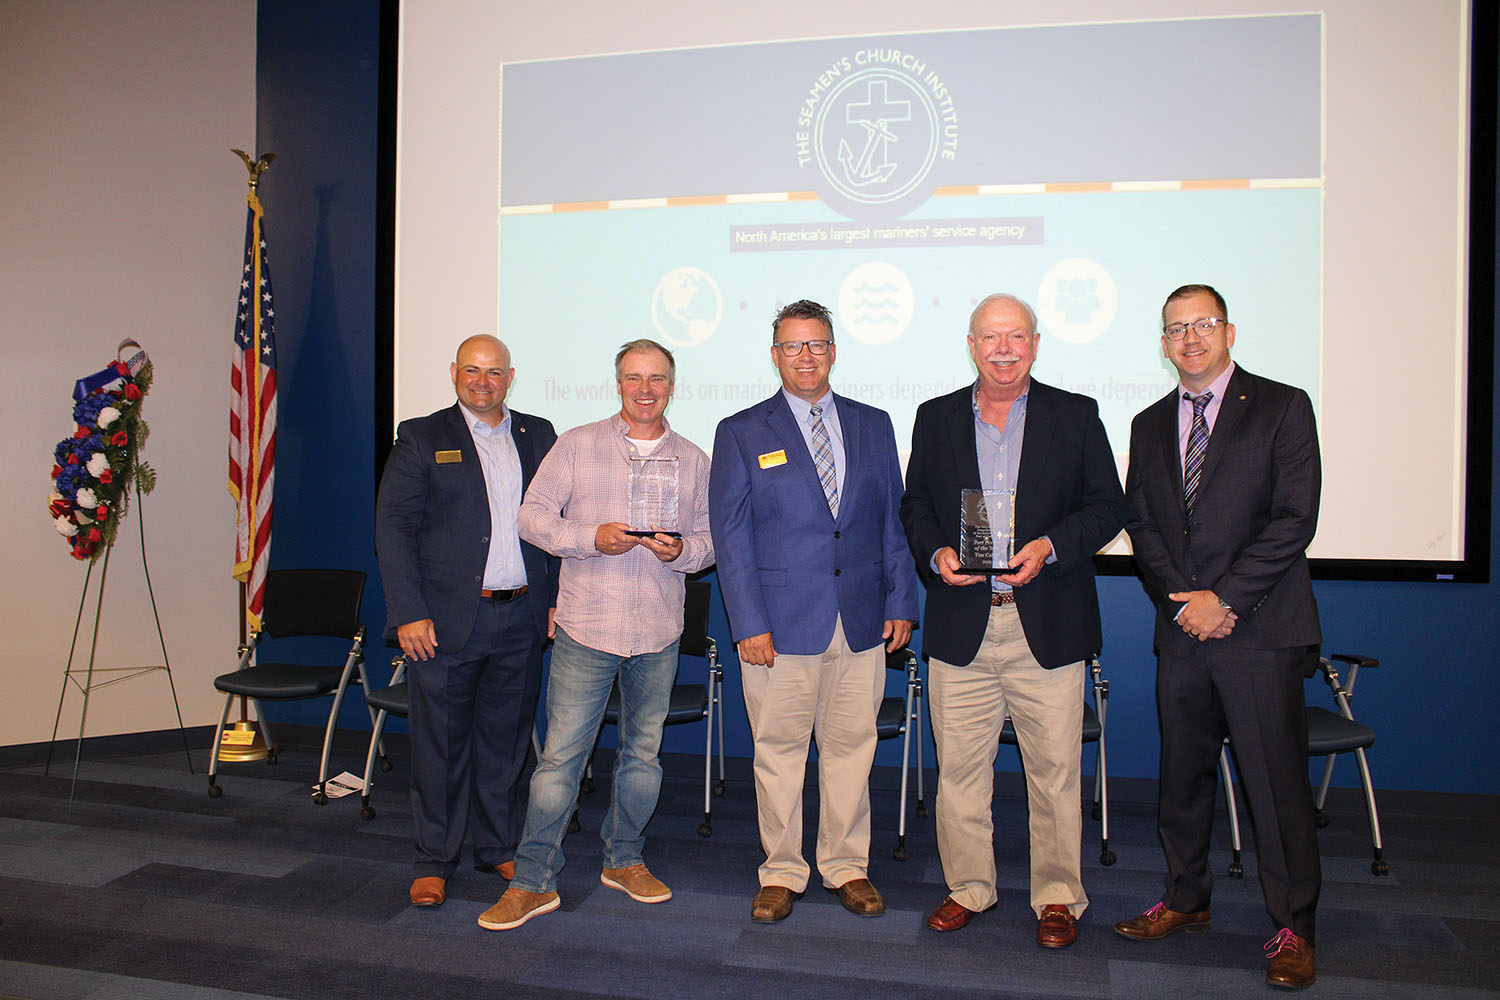 Left to right: Paducah Club Chairman Andrew Gates, Maritime Person of the Year Chad Pregracke of Living Lands & Waters, Club President Caleb King, Port Person of the Year Tim Cahill of the Paducah-McCracken County Riverport Authority and Club News Editor Mason DeJarnett. (Photo by Shelley Byrne)